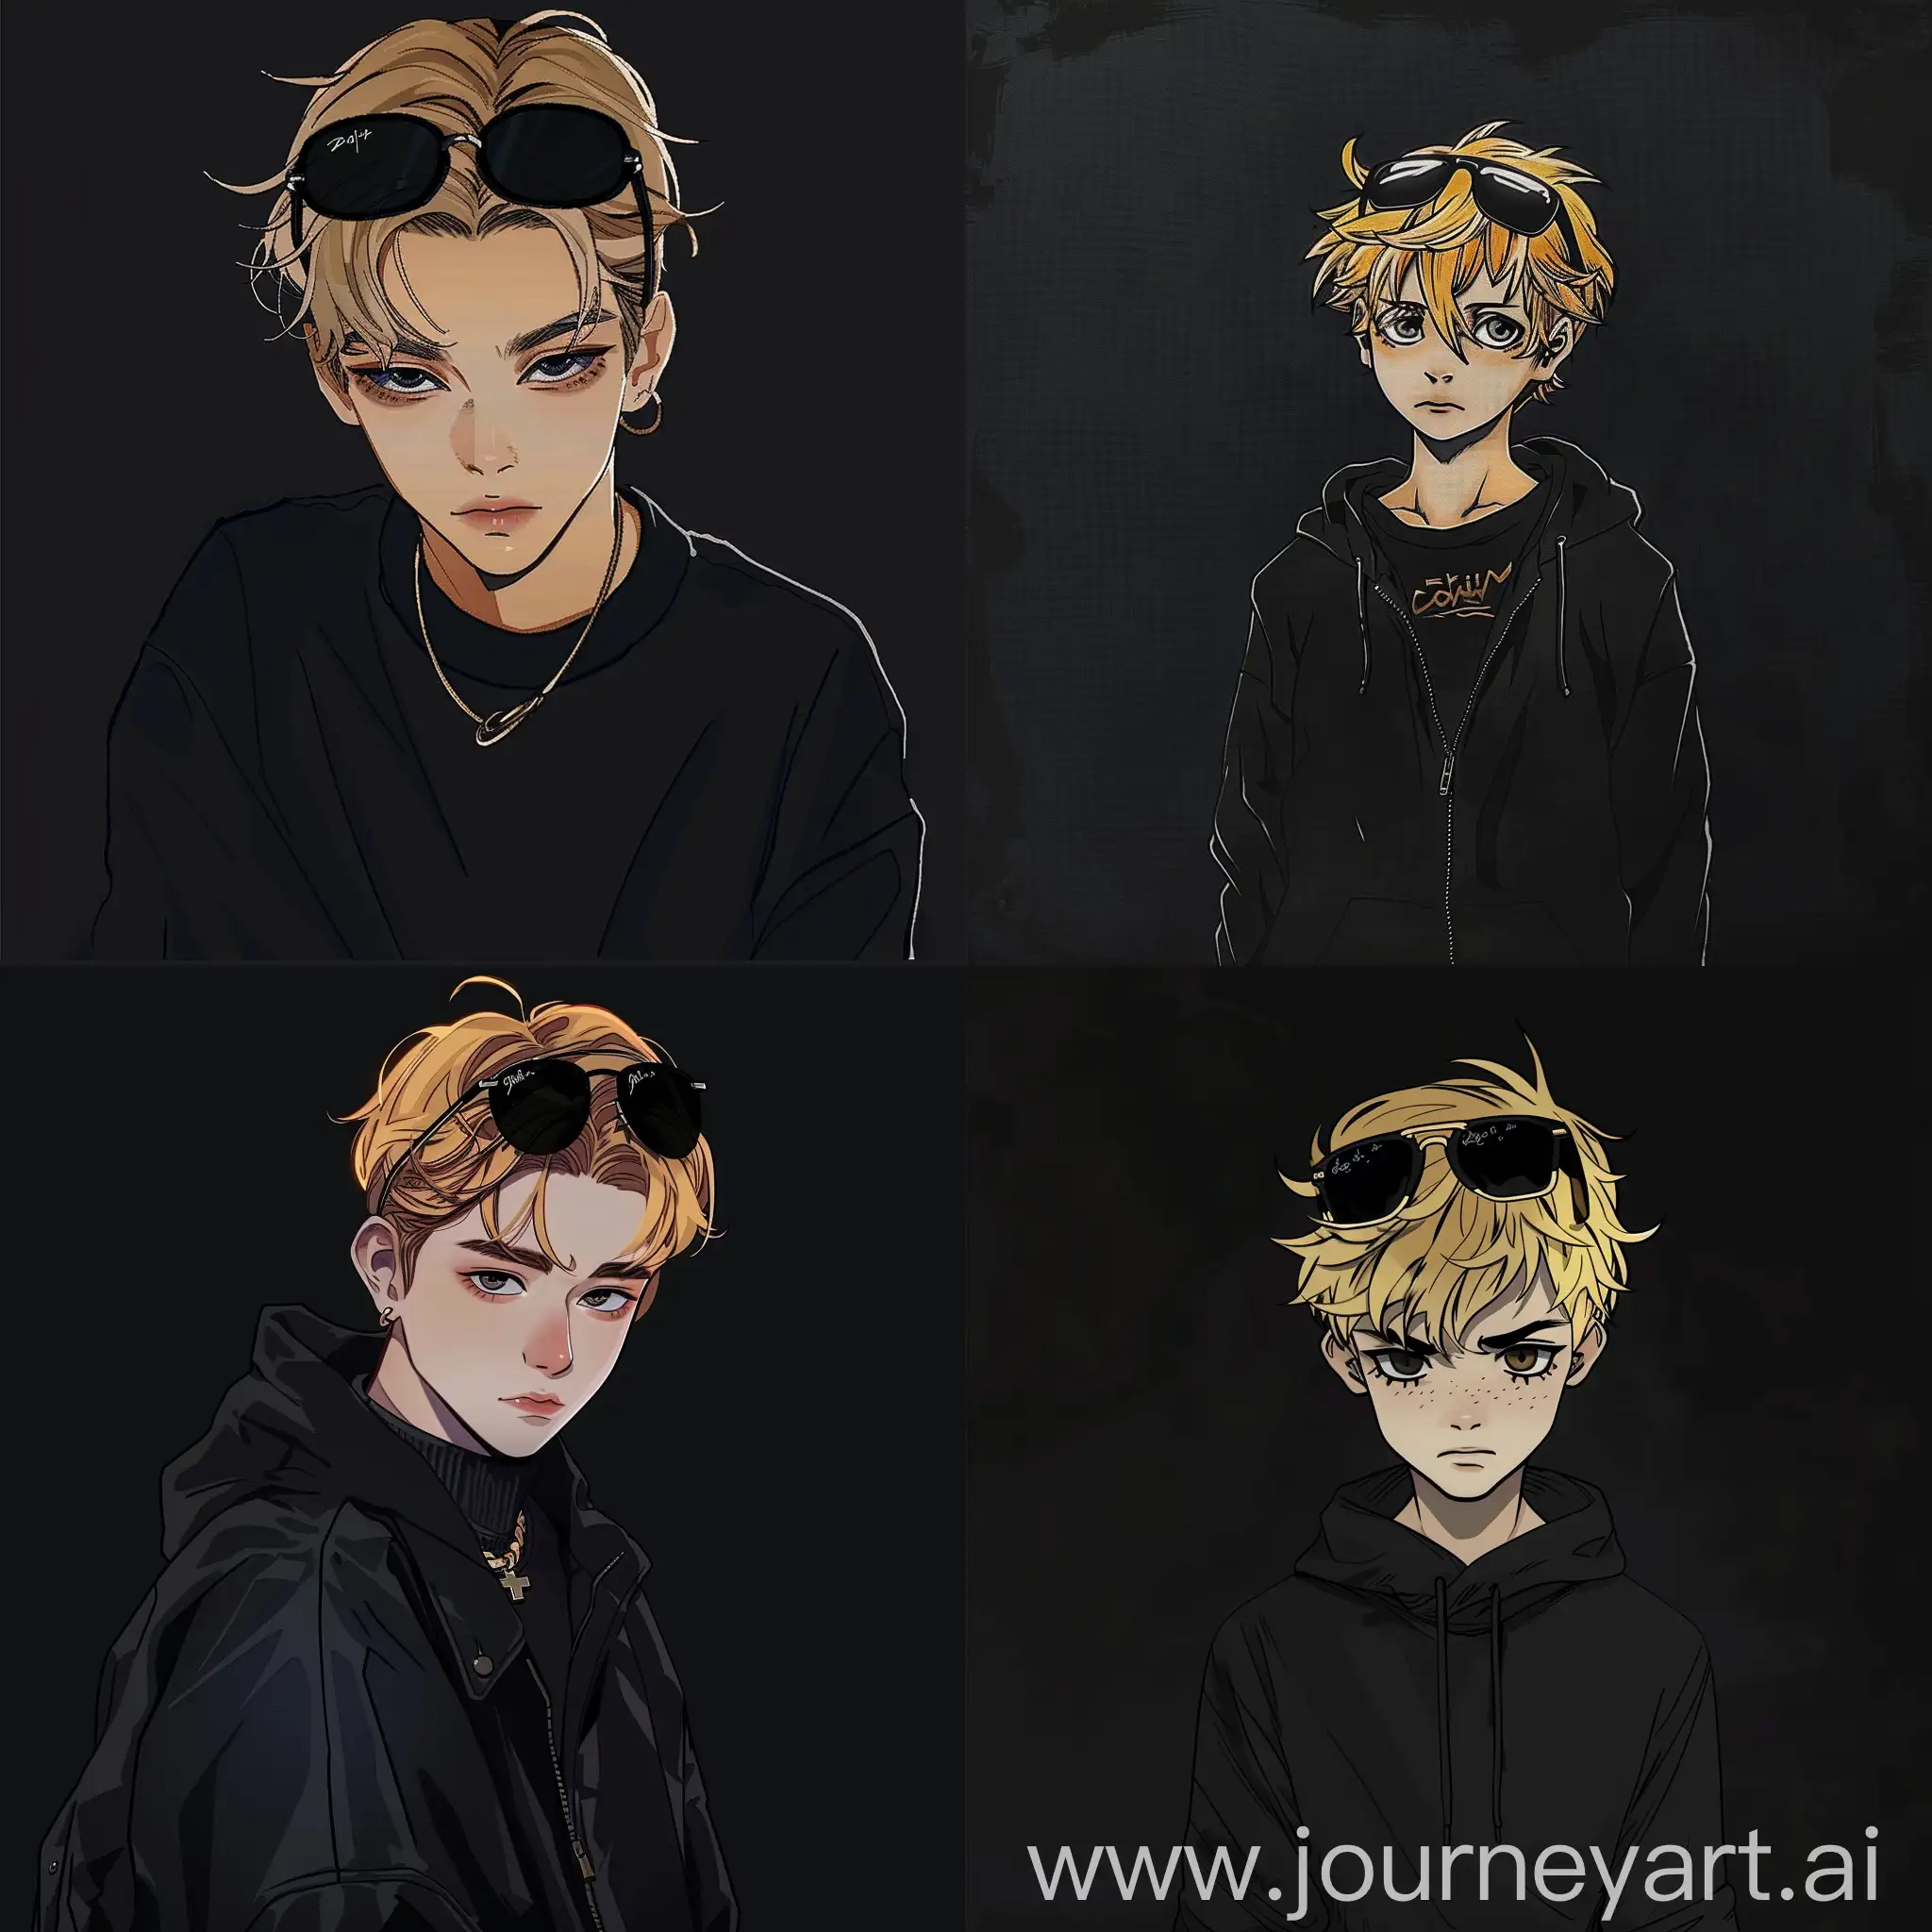 black background, teenage boy, teenager boy, blonde hair, sunglasses on his forehead, black outfit, animated drawing